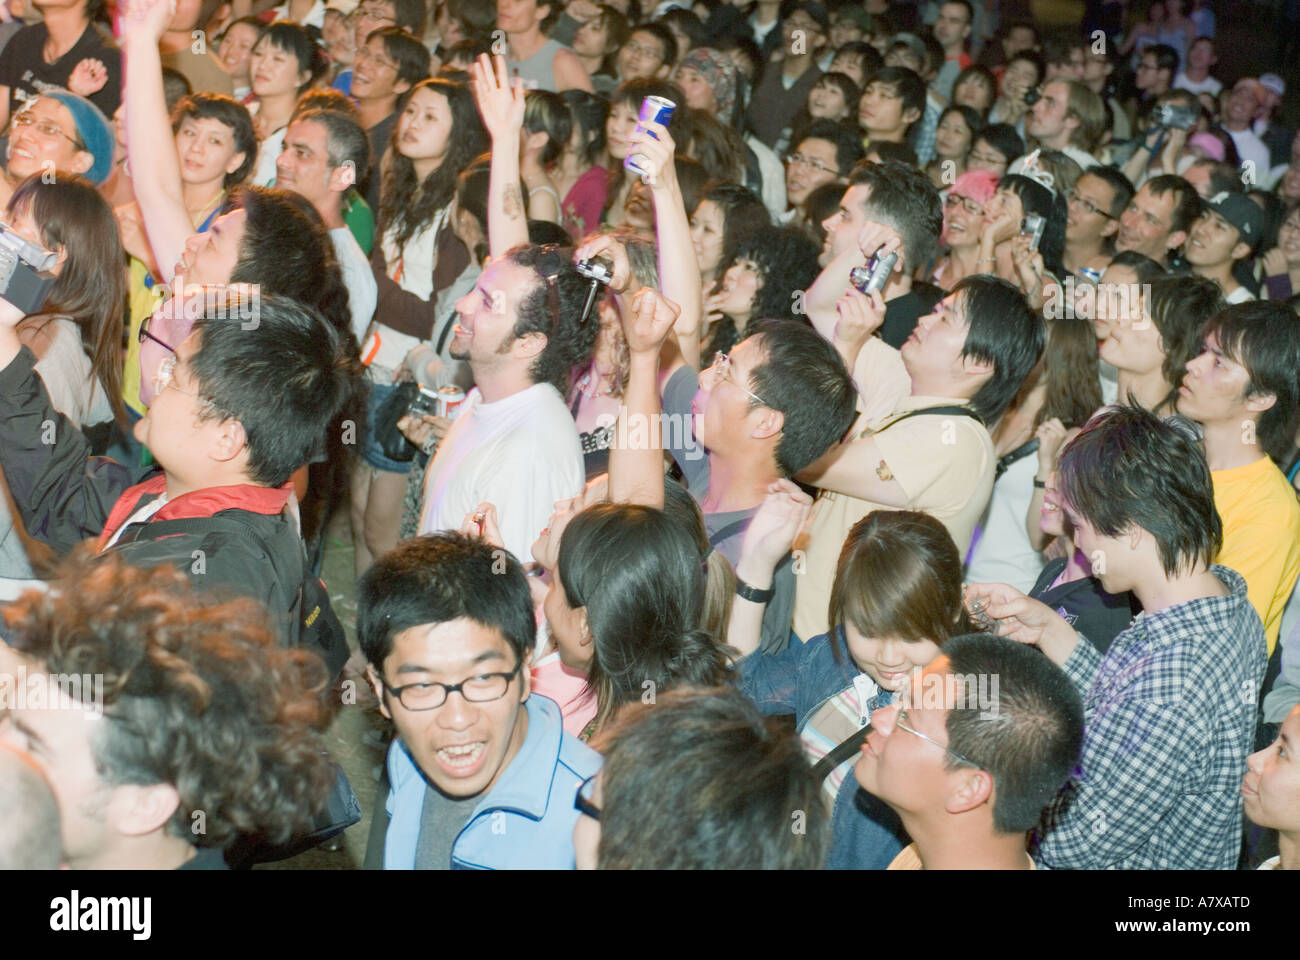 Multiethnic crowd listening to and watching live music concert Taiwan China Kenting Spring Scream Stock Photo